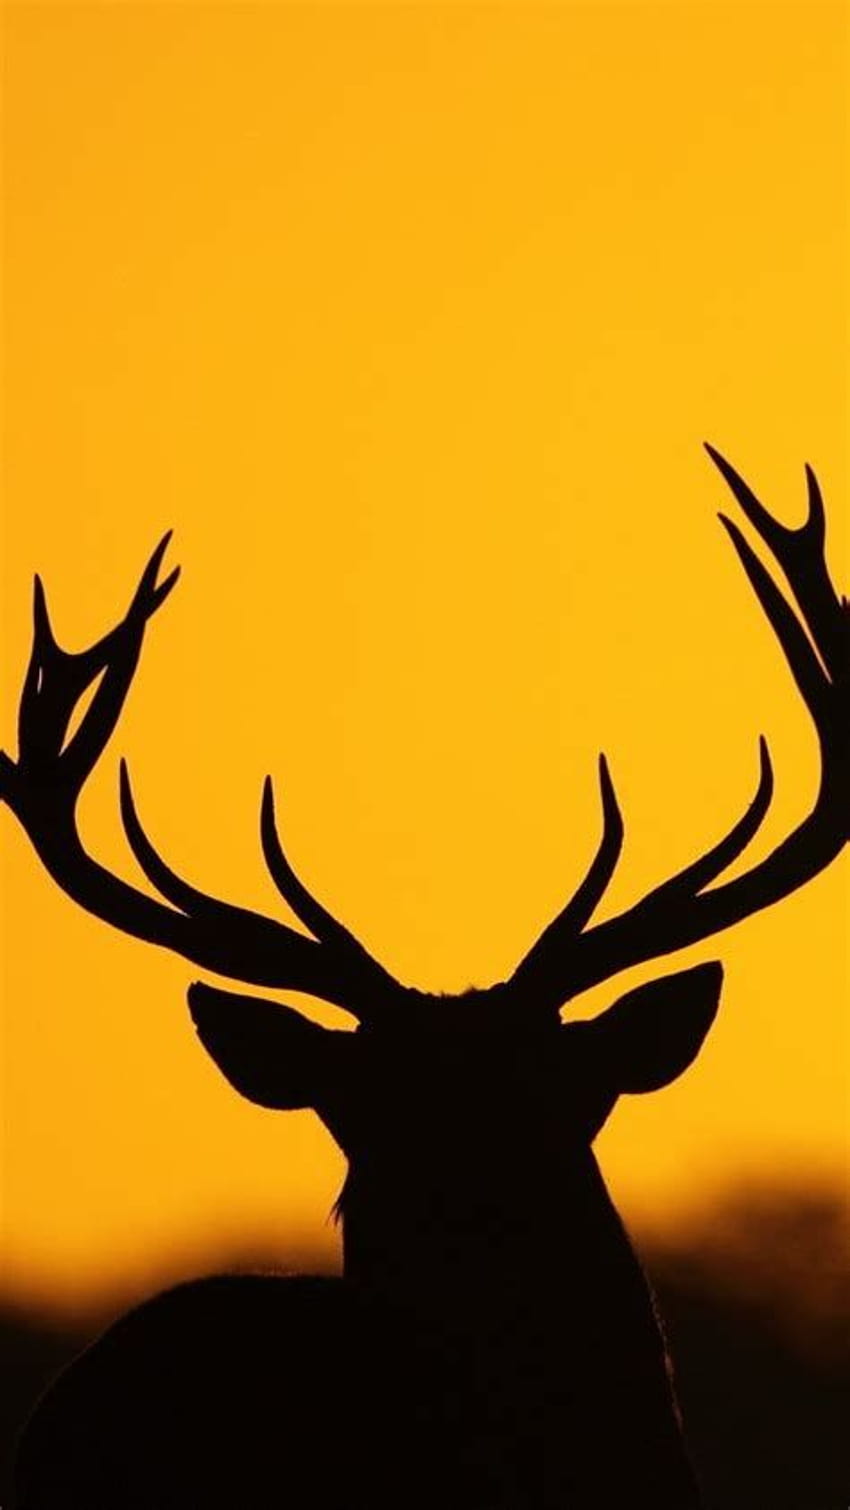 Small Deer with Antlers Silhouette HD phone wallpaper